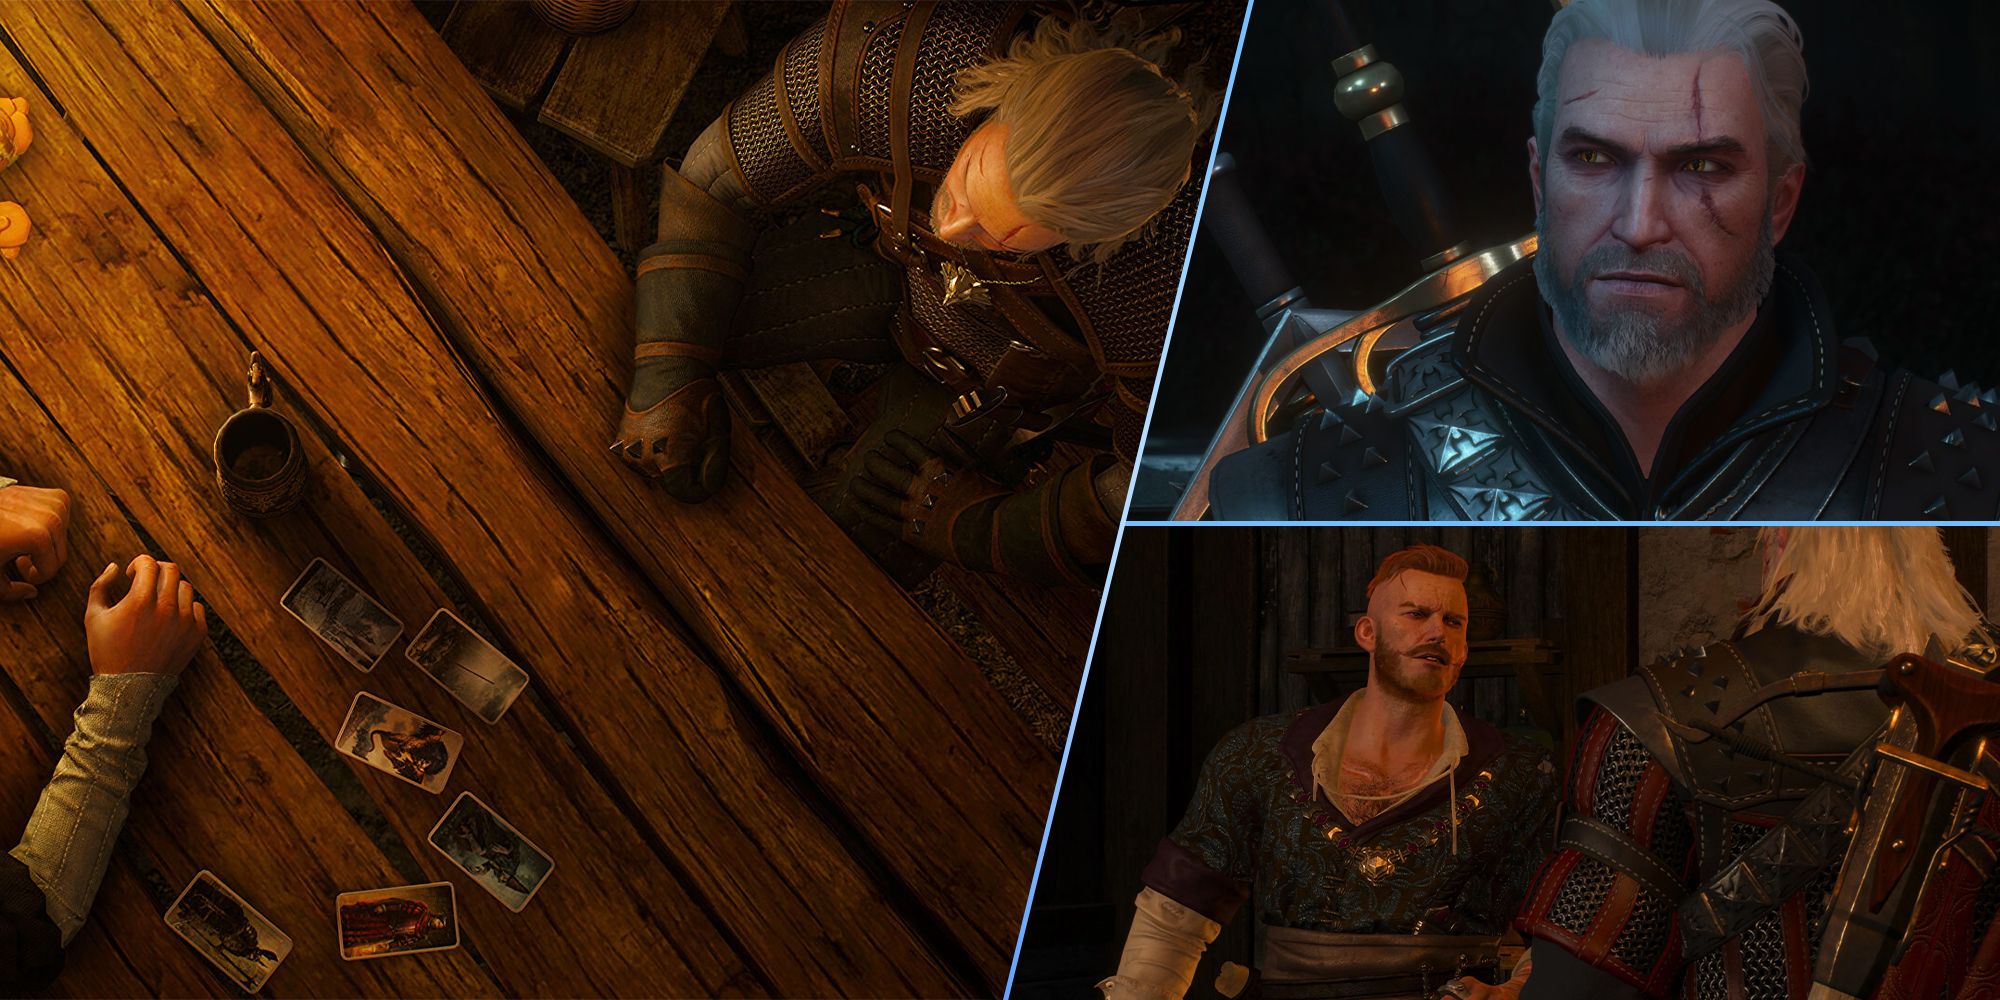 An image of Geralt playing Gwent, and two more images showing Olgierd and Geralt